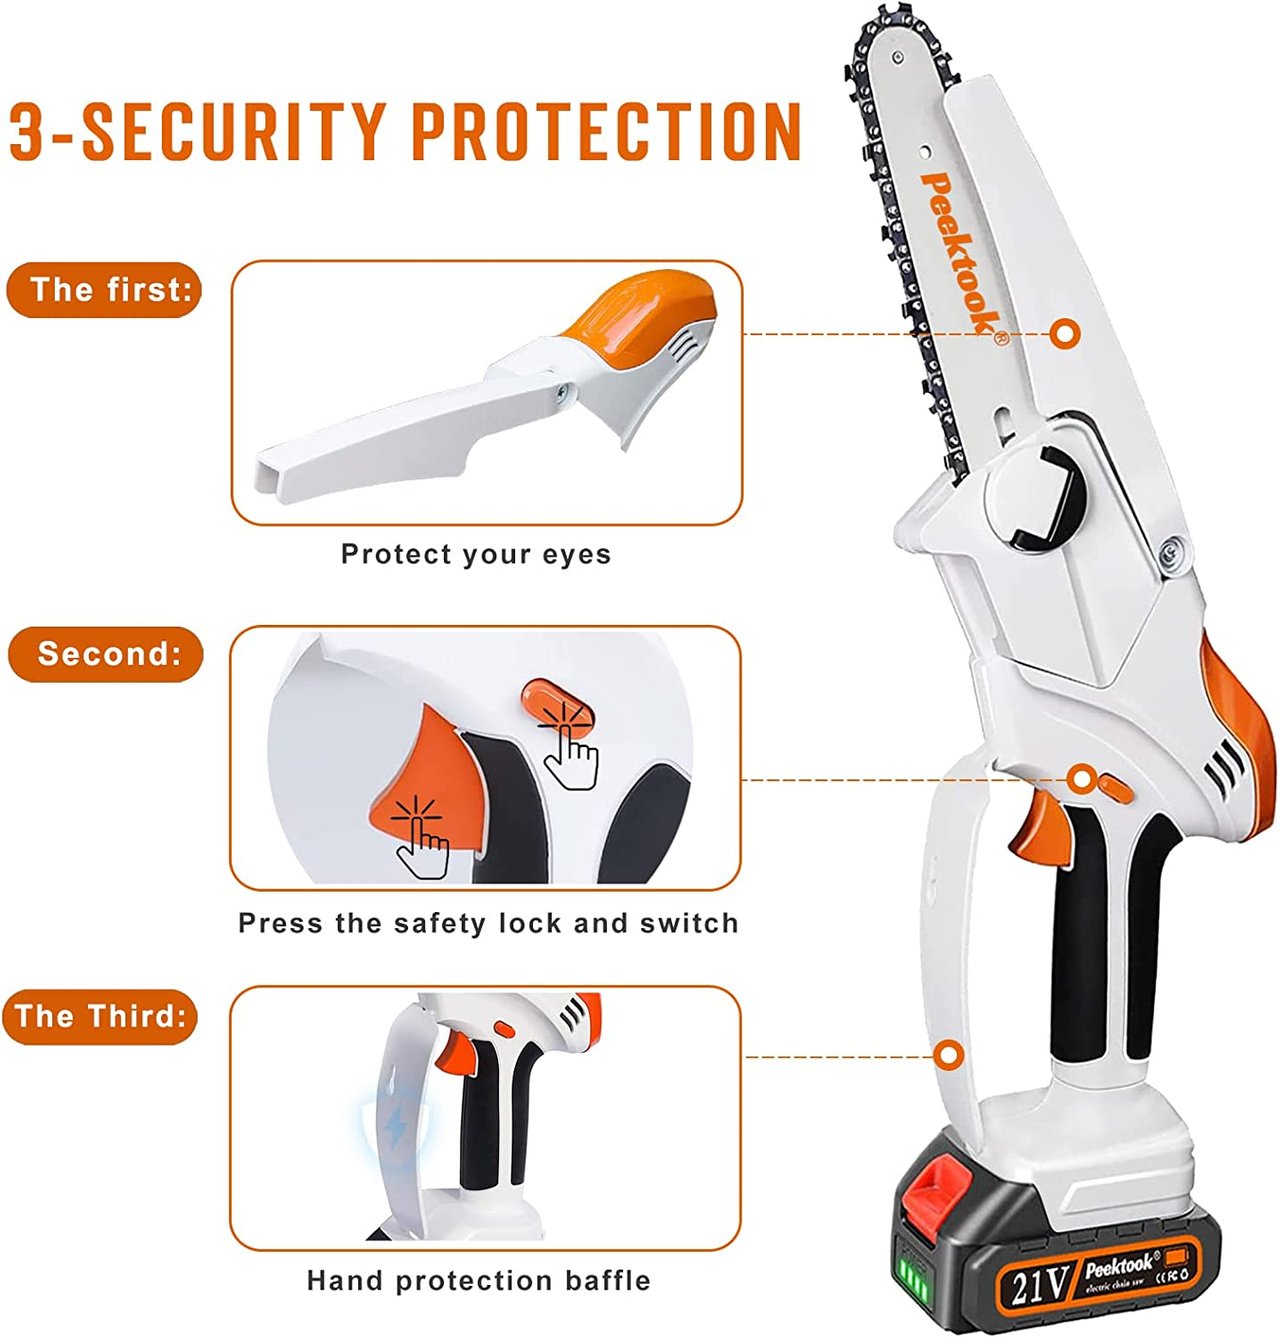 5 Peektook Mini Chainsaw Cordless Electric Chainsaw, Upgrated 6 Inch Chain Saw with 2 Battery and 2 Chains, Portable Scie à Chaîne à Batterie with Safety Lock and Strong Power Perfect for Trim Shrubs/Branches/Logging in Gardens Yards and Camping